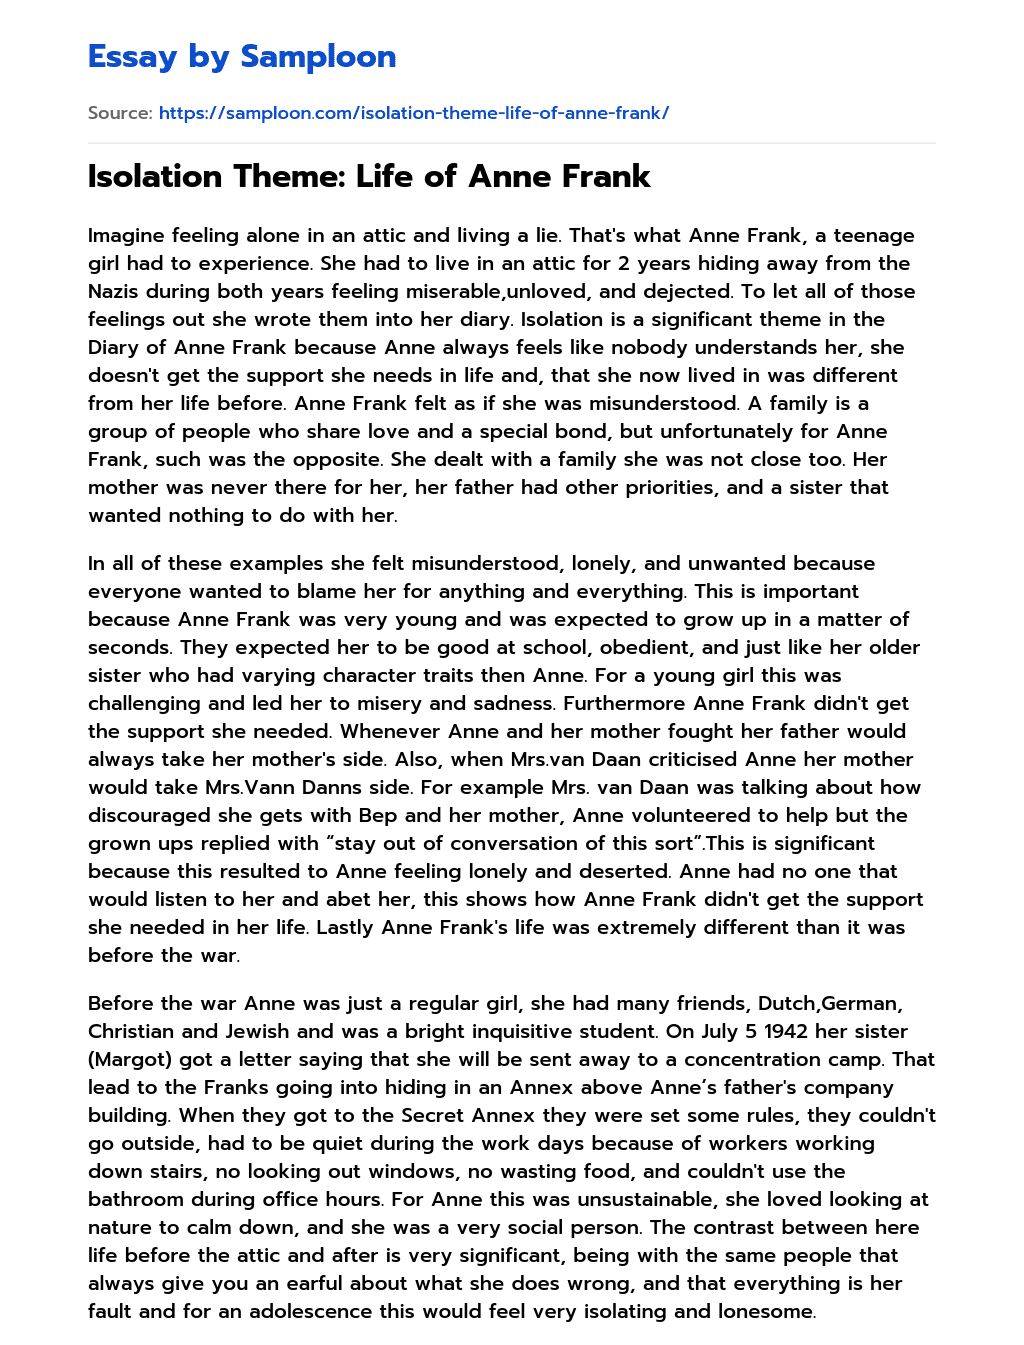 Isolation Theme: Life of Anne Frank essay